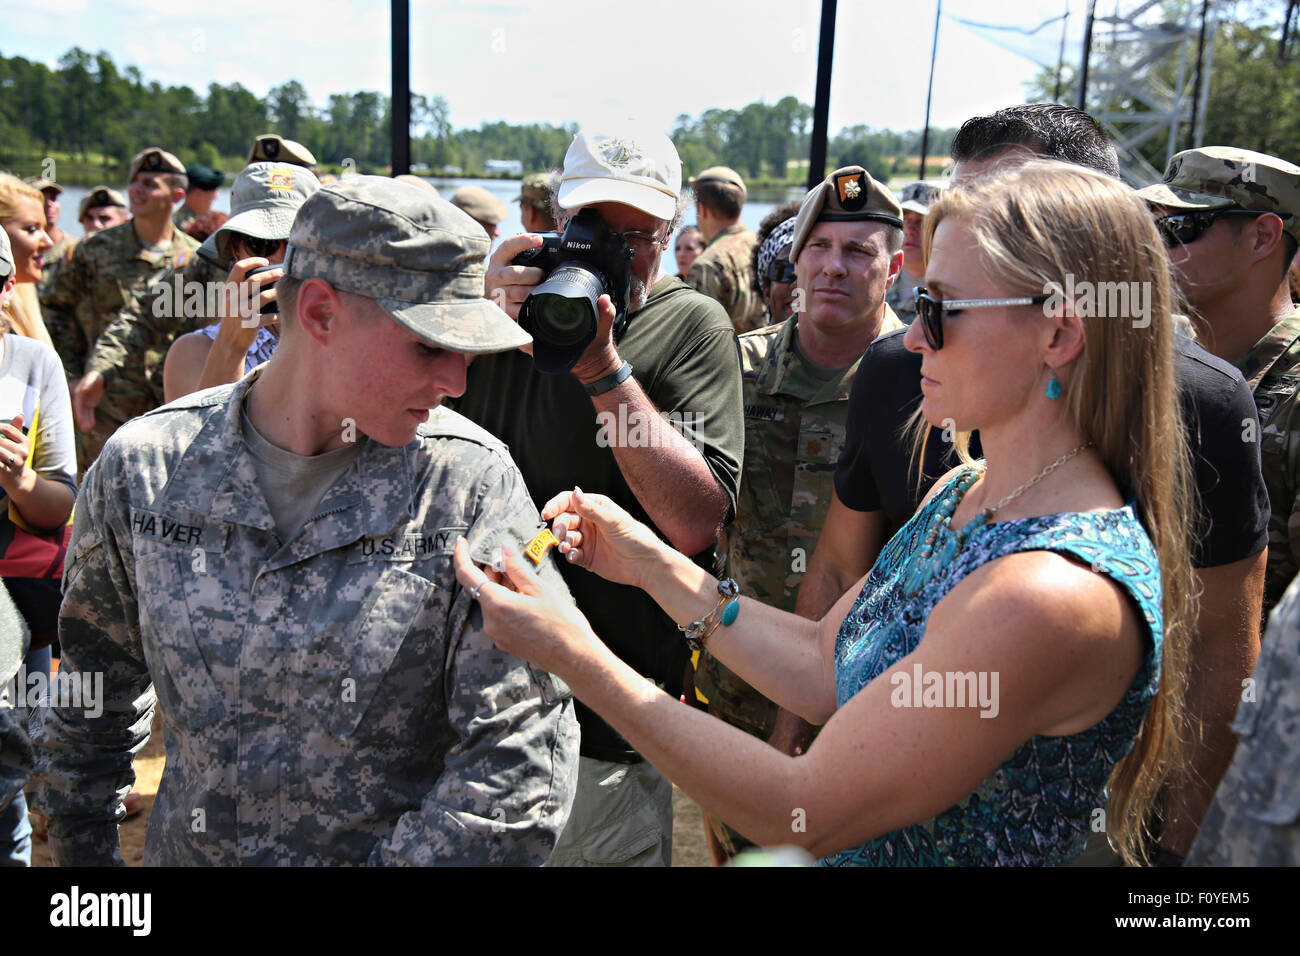 U.S. Army 1st Lt. Shaye Haver, has the elite Ranger Tab pinned on her uniform after becoming the first woman to graduate from Army Ranger school August 21, 2015 at Fort Benning, Georgia. Haver and fellow soldier 1st Lt. Kristen Griest became the first women to graduate from the 61-day-long Ranger course considered one of the most intense and demanding in the military. Stock Photo